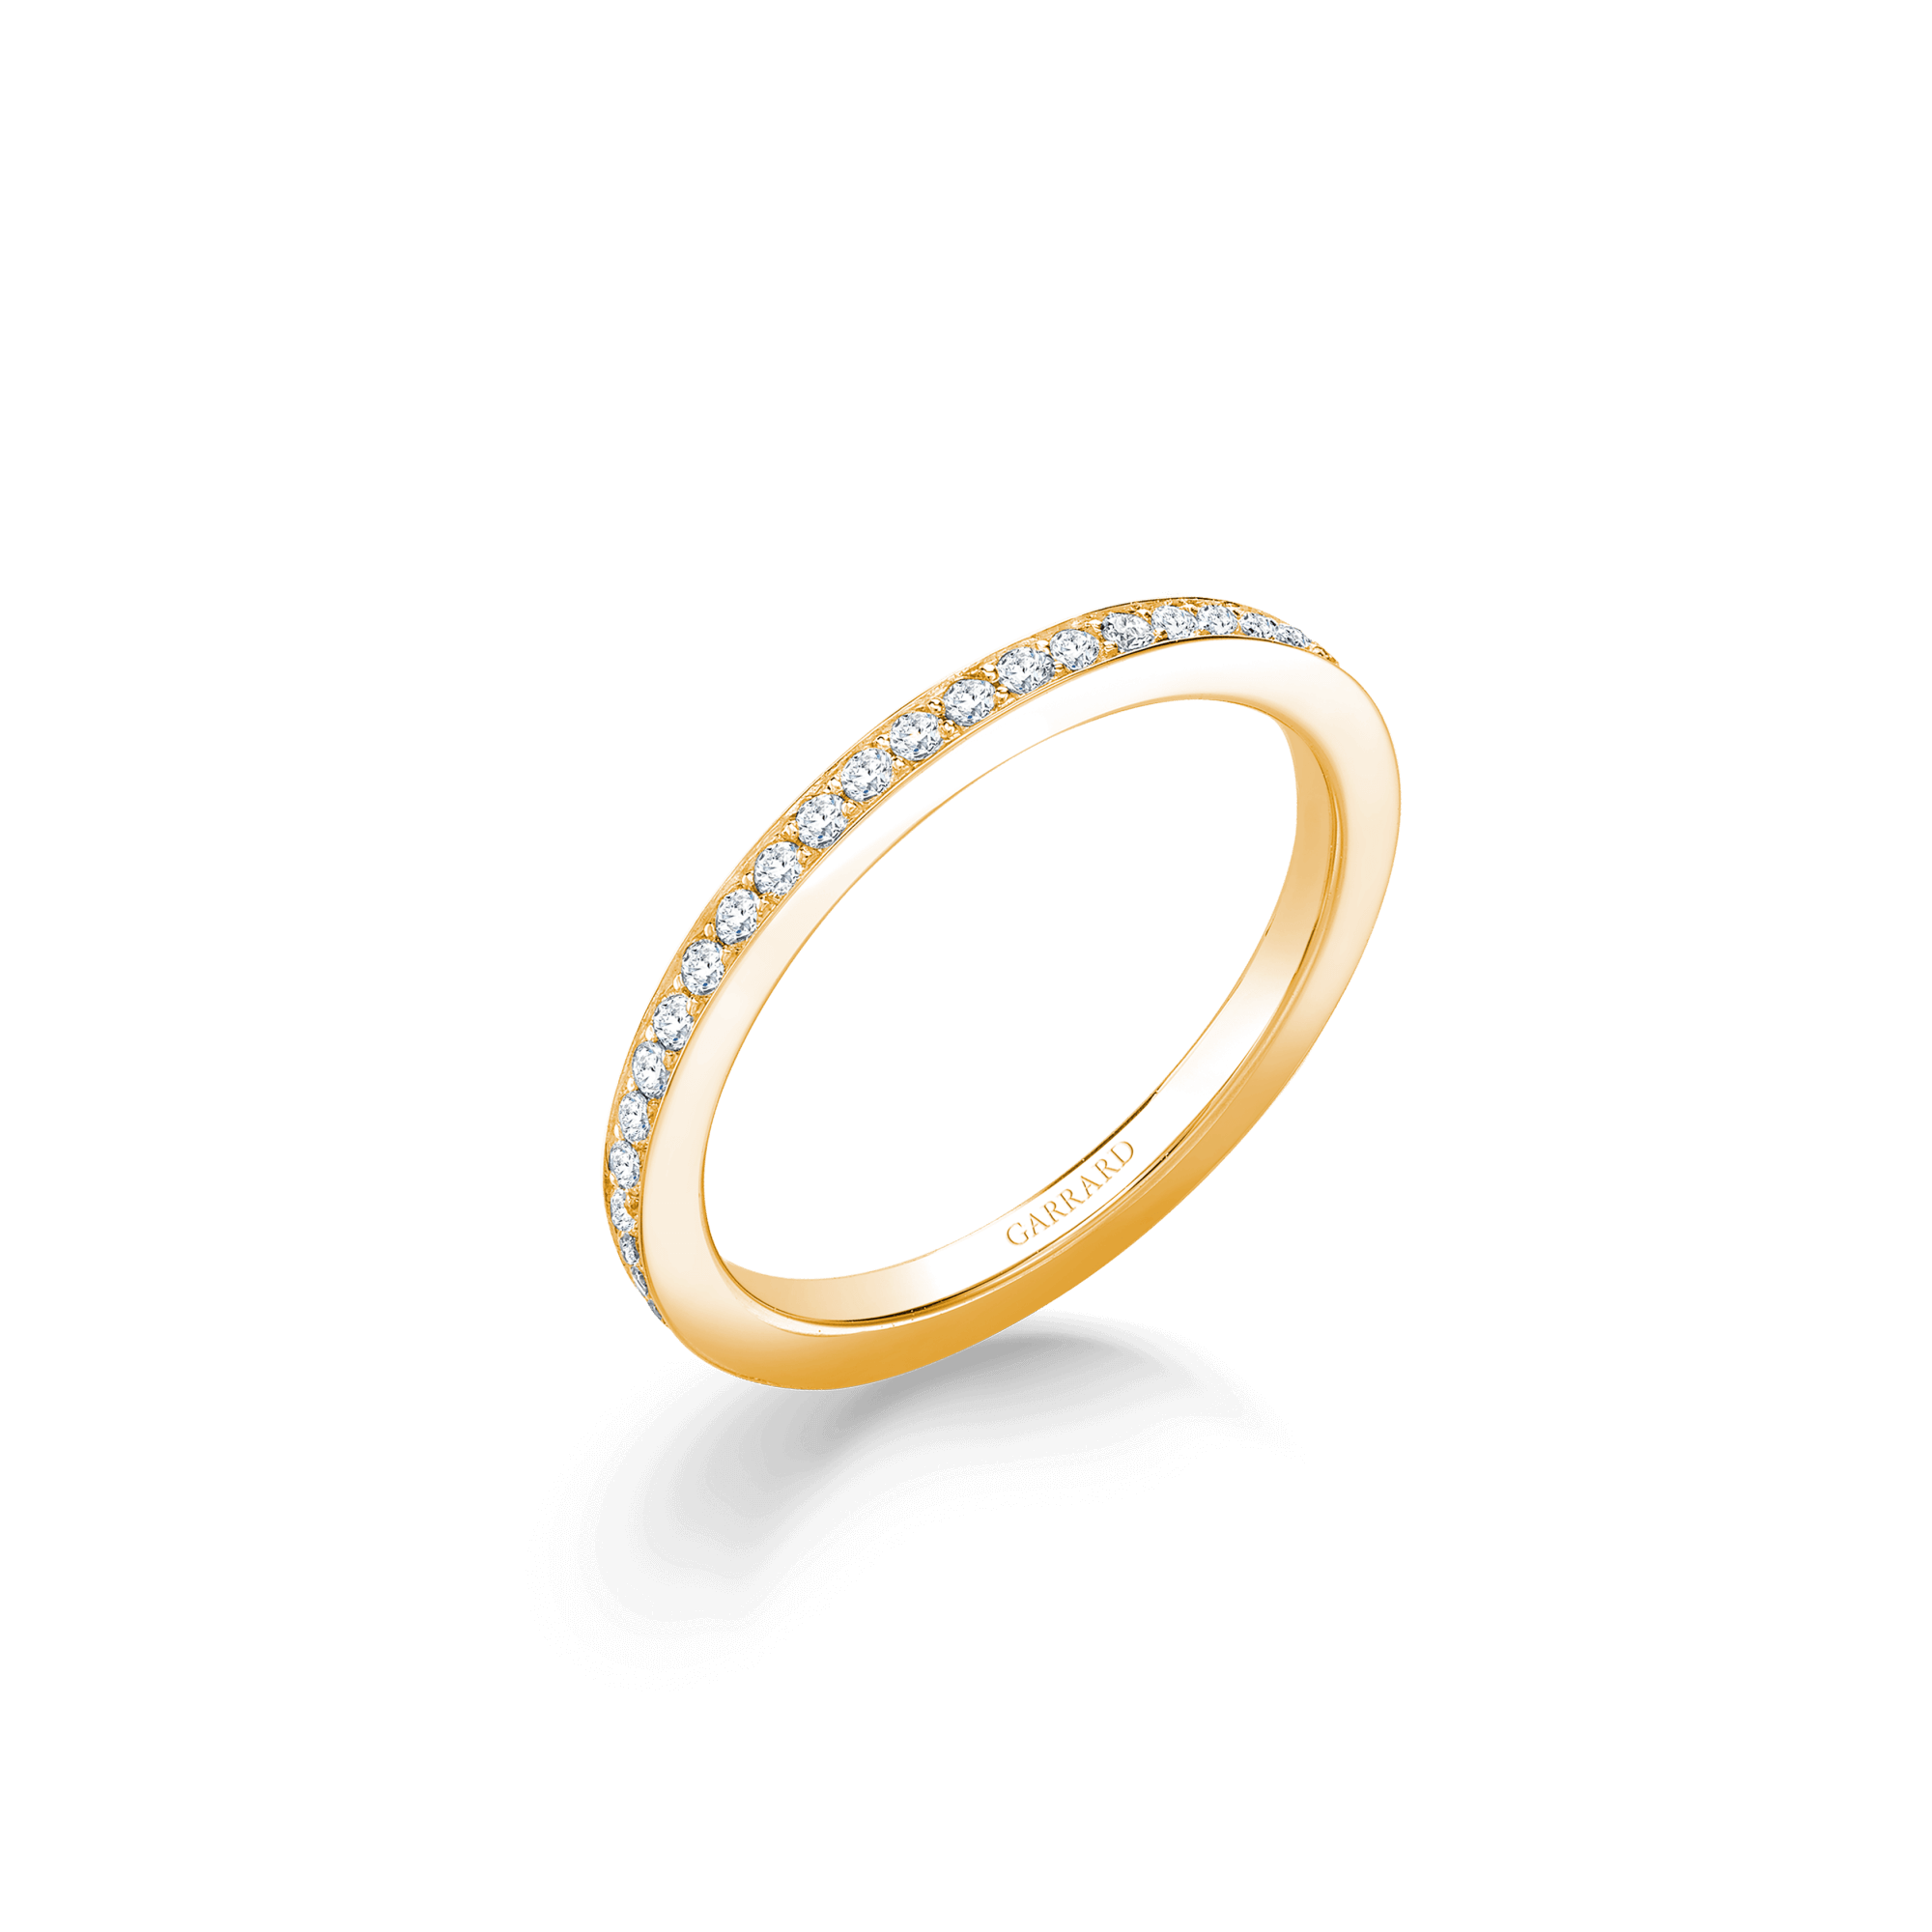 Garrard Bridal jewellery collection 1735 Diamond Eternity Band in 18ct Yellow Gold 1.5mm 2017256